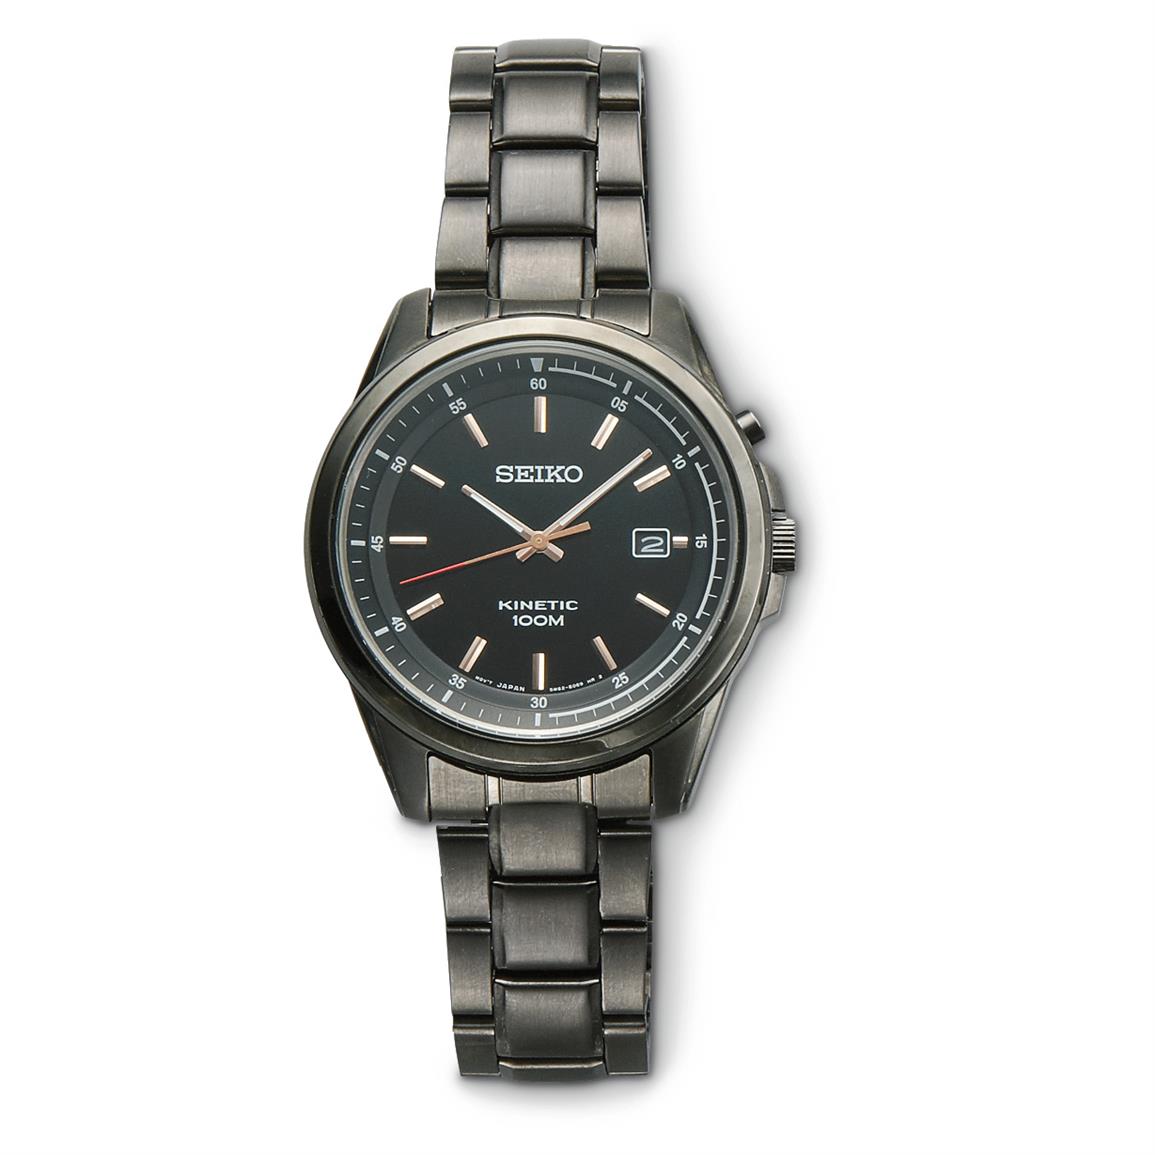 SEIKO Black Ion Kinetic Watch - 633789, Watches at Sportsman's Guide